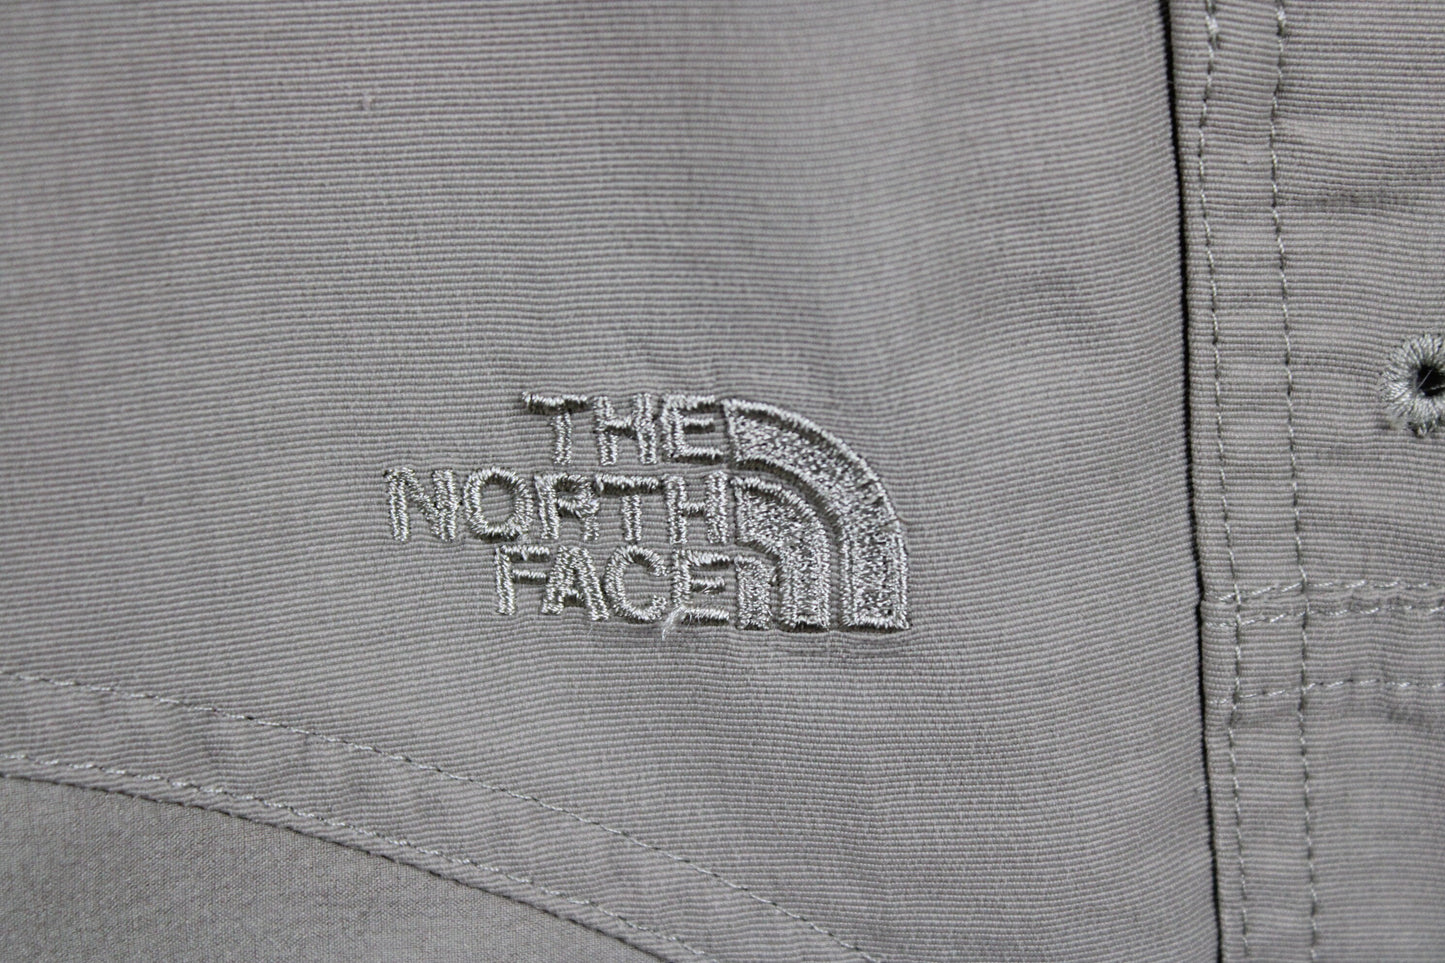 The-North-Face Climber-Pants / Vintage Windbreaker Tearaways Style Joggers / 90s Streetwear / Hip Hop Clothing / Men's TNF